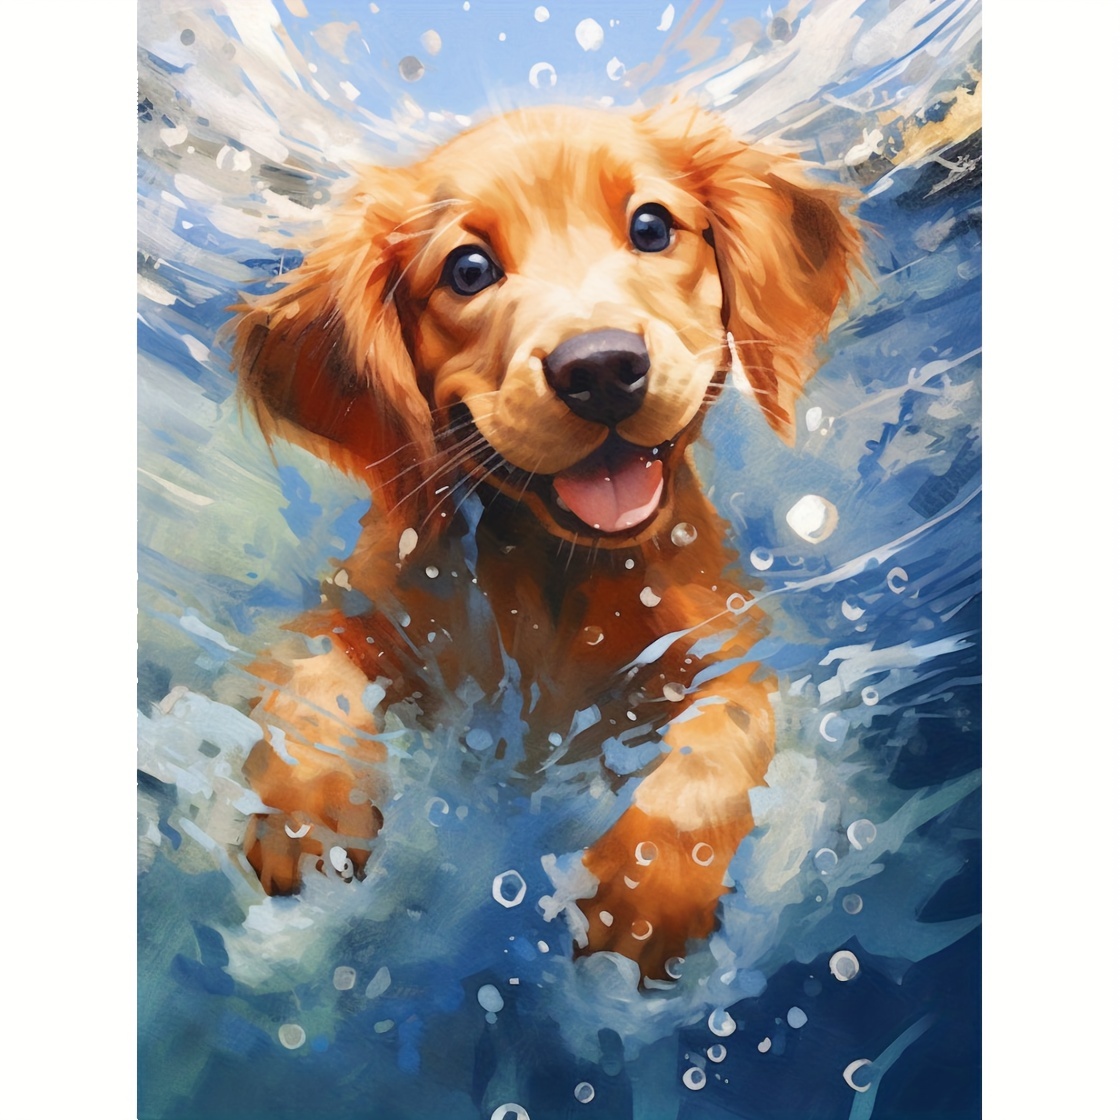 5D Diamond Painting Little Puppy and Presents Kit